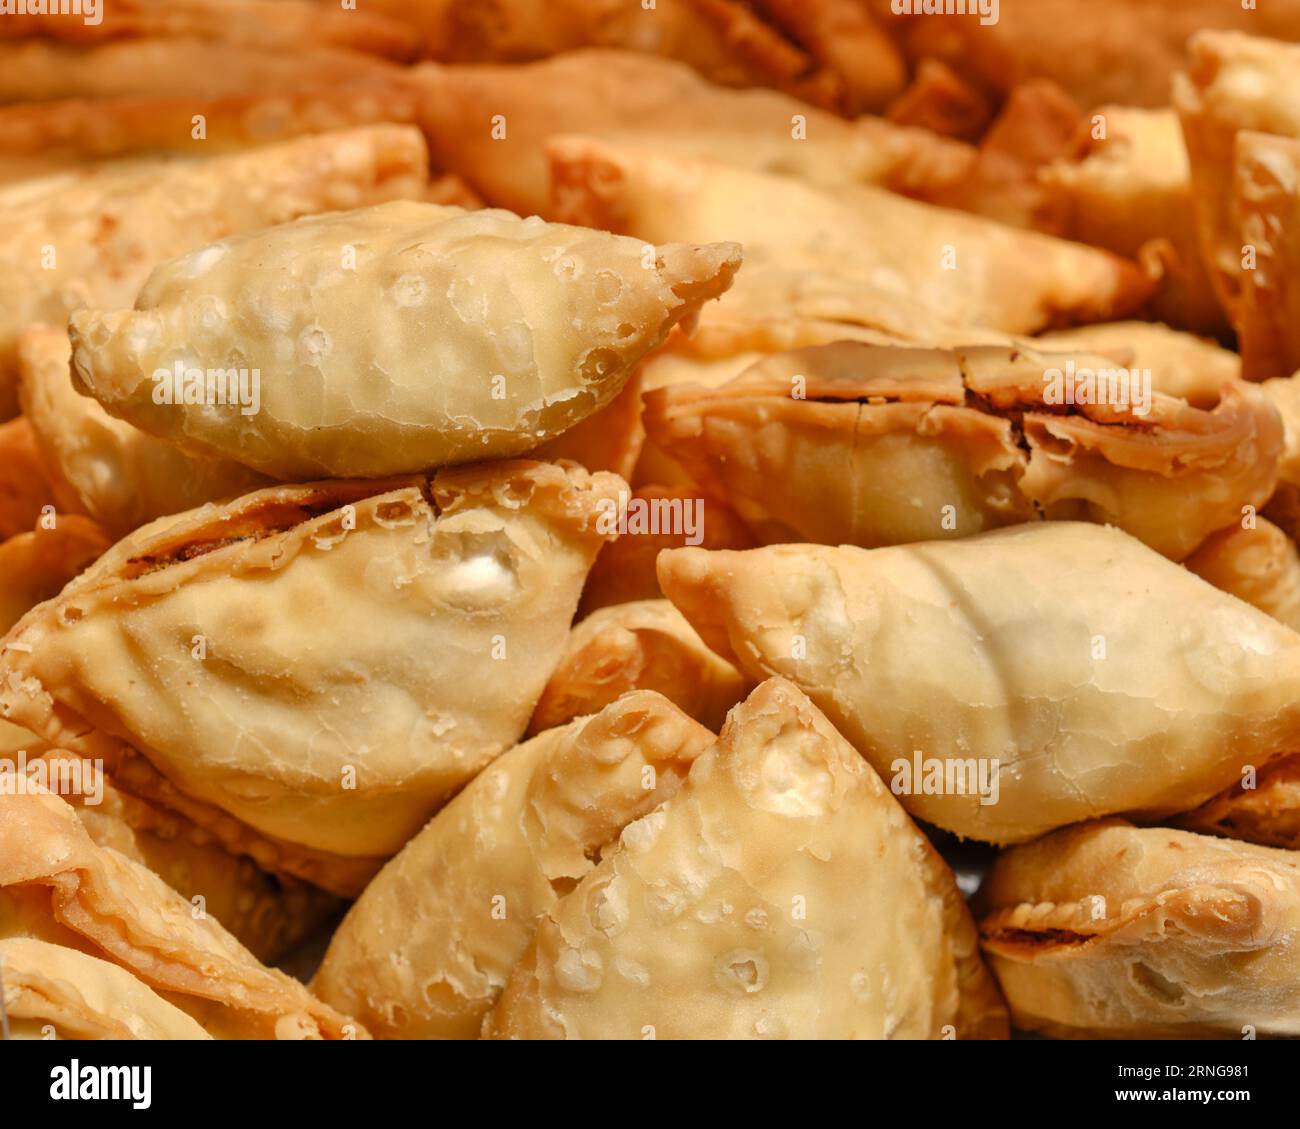 close up of a pile of samosas Stock Photo